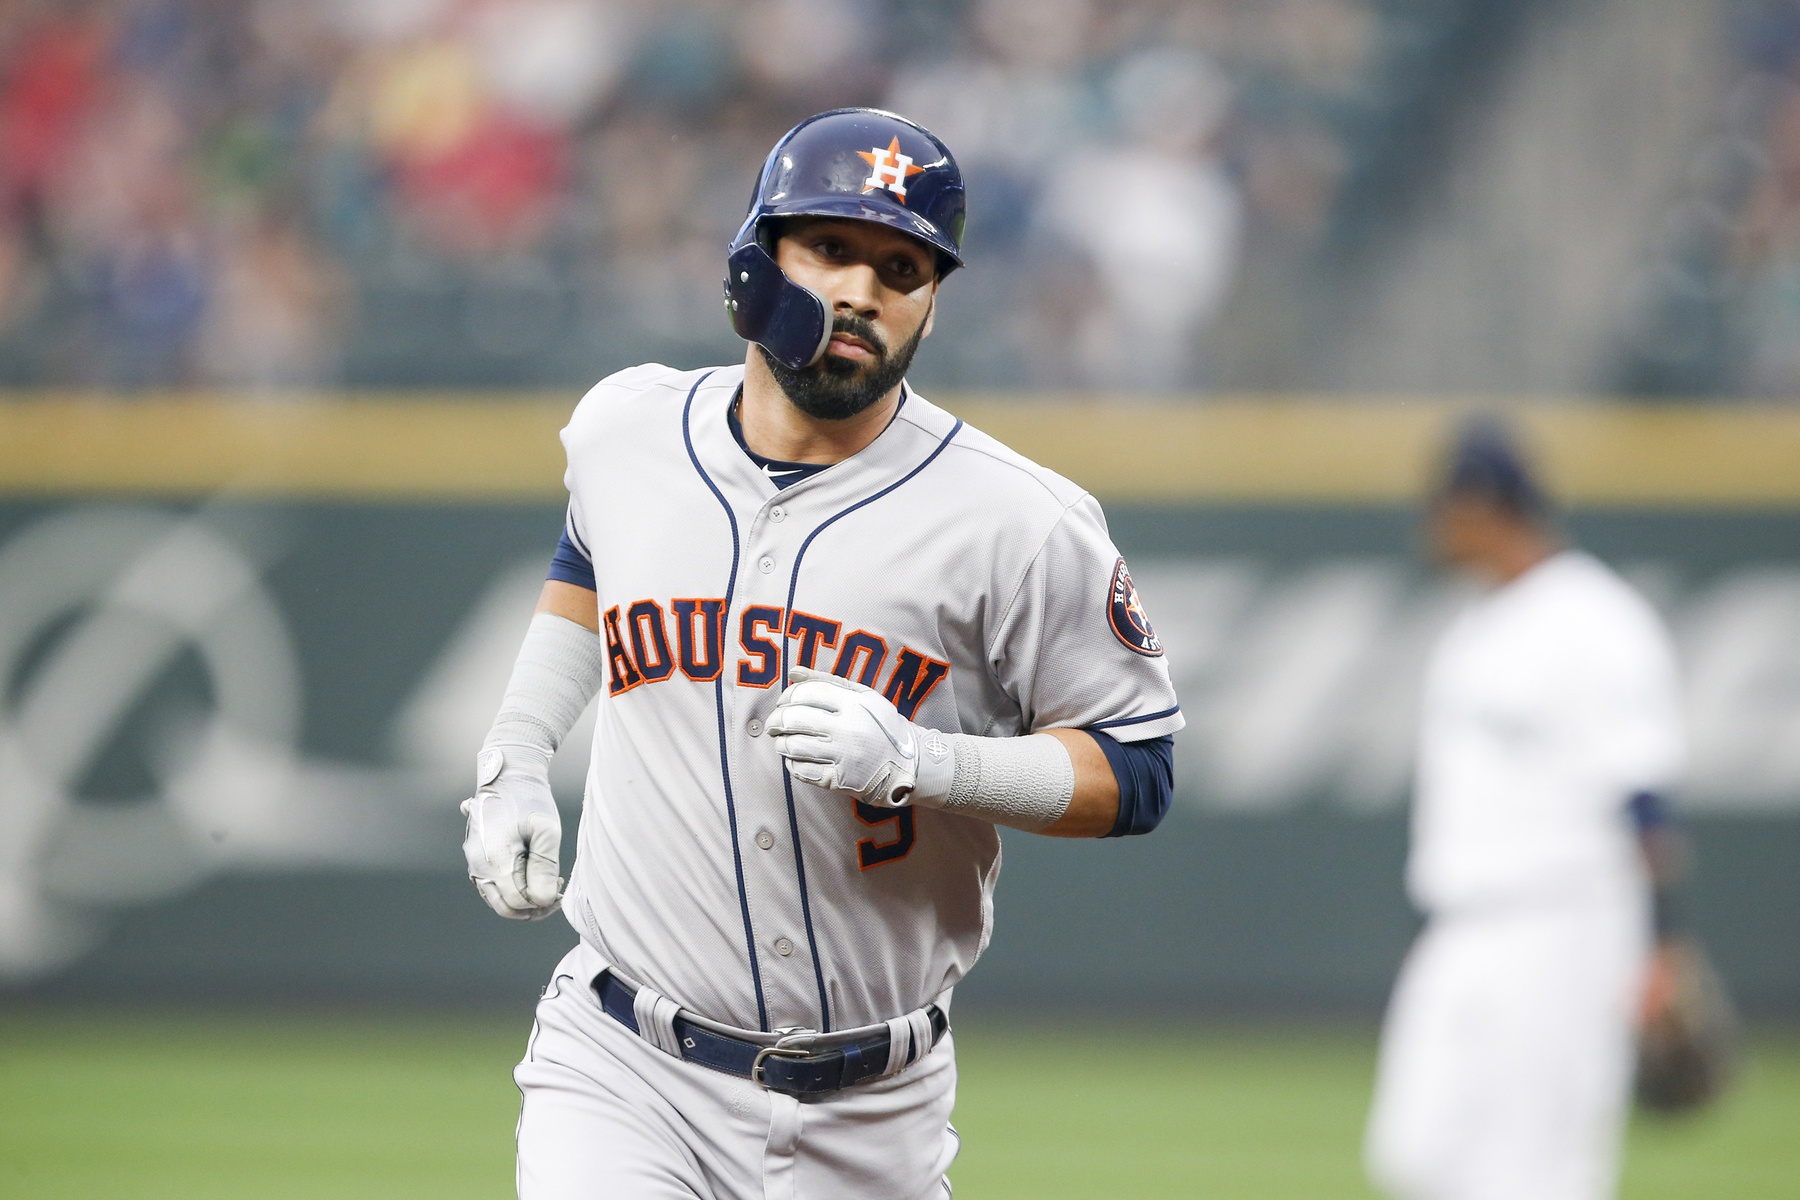 ABC13 Houston - SIGN-STEALING SCANDAL: A popular player during his time in  Houston, Marwin Gonzalez is the first position player from the 2017 Astros  World Series team to apologize